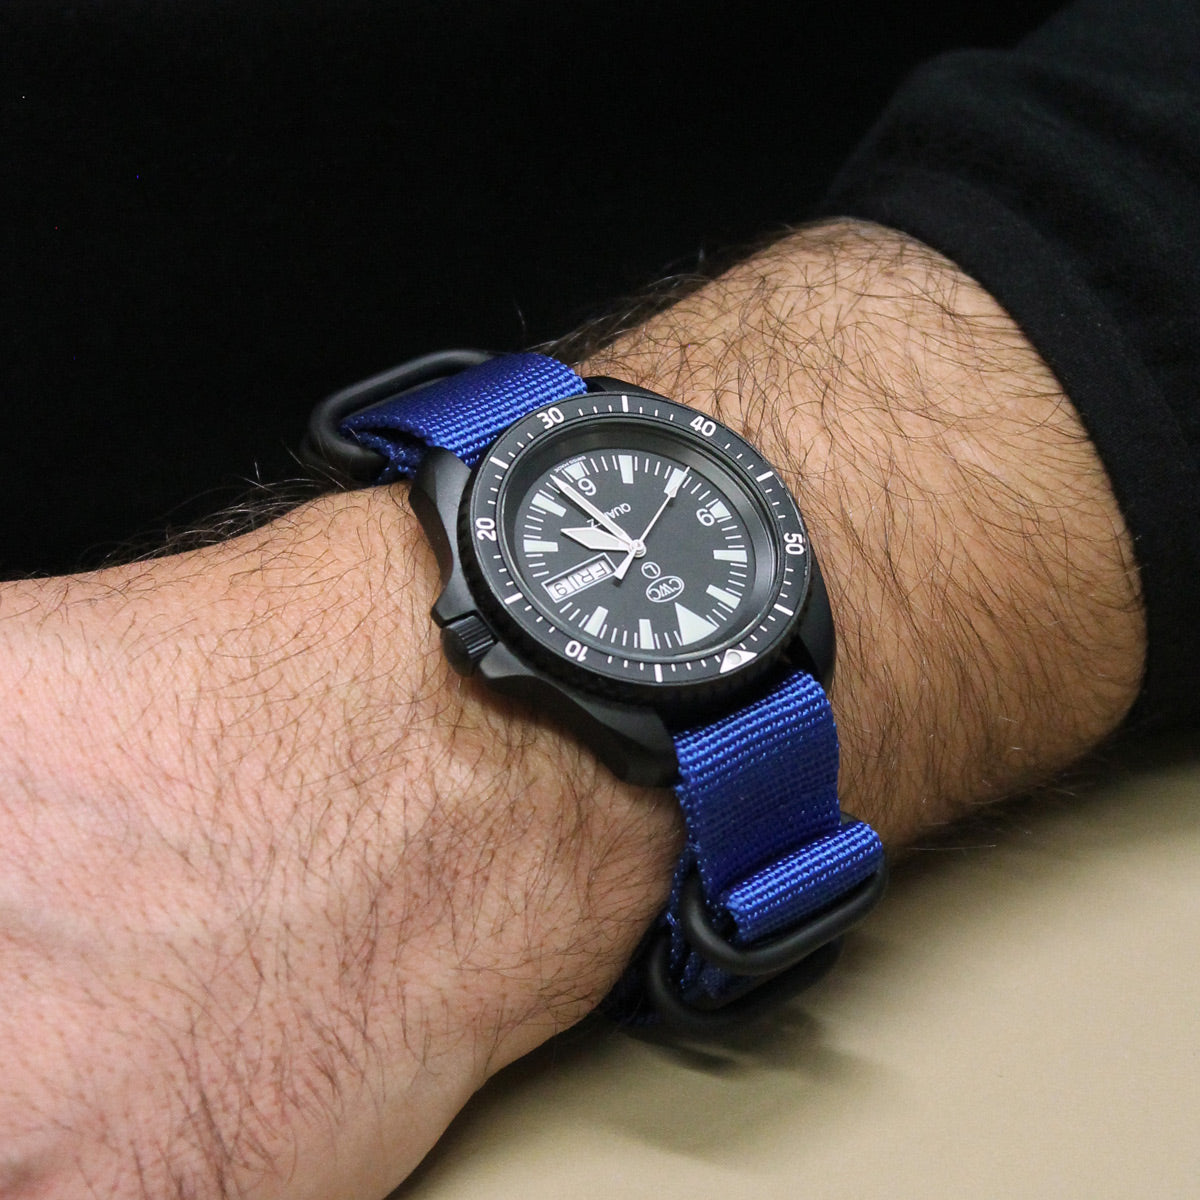 NATO STYLE 5-RING ZULU WATCH STRAP - BLUE WITH BLACK BUCKLES